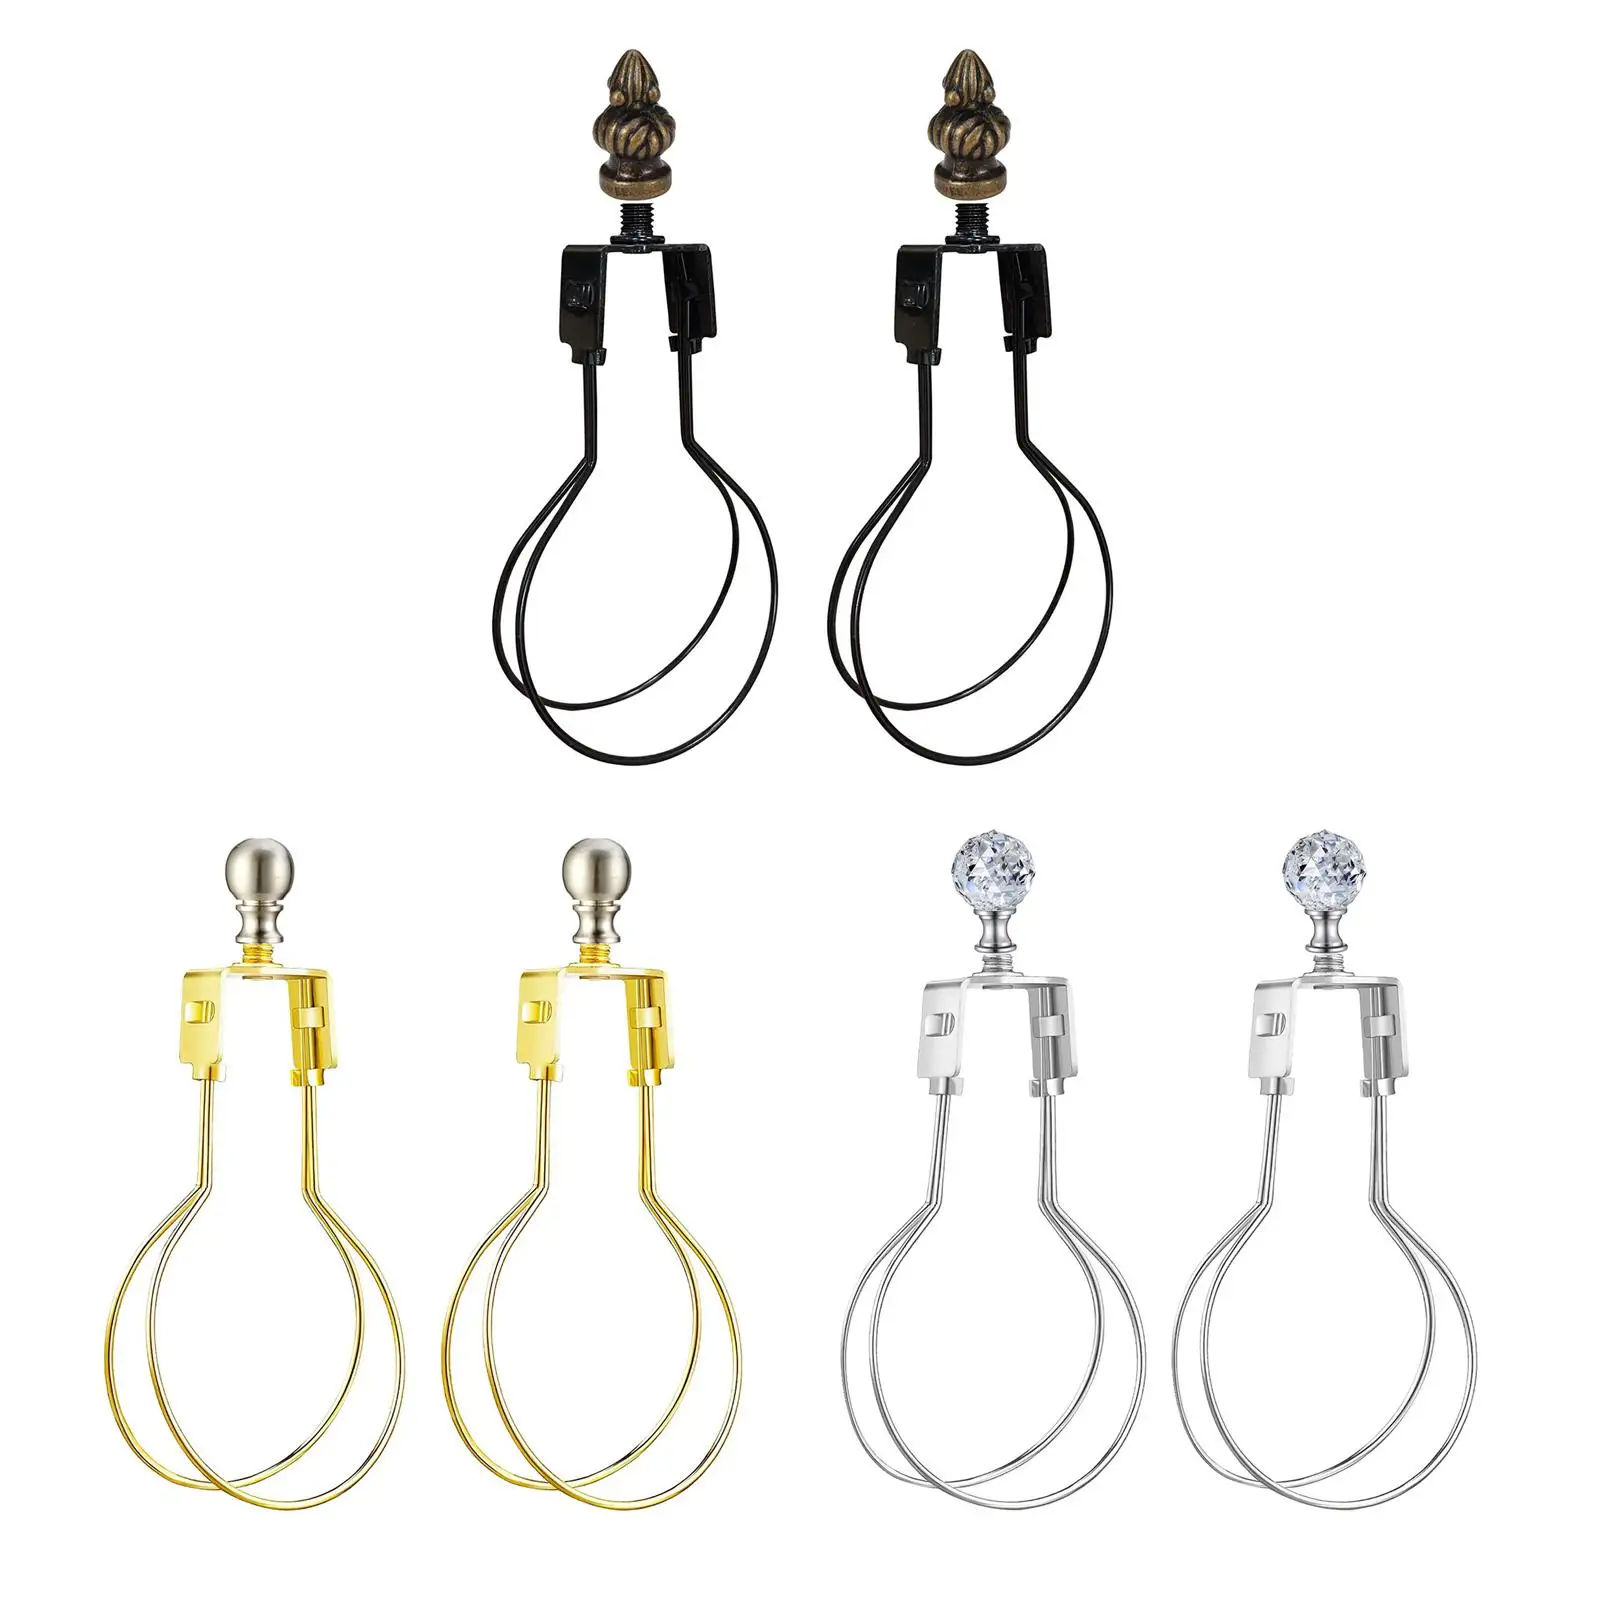 Lamp Shade Bulb Clip Adapters Includes Finial for Lighting Fittings